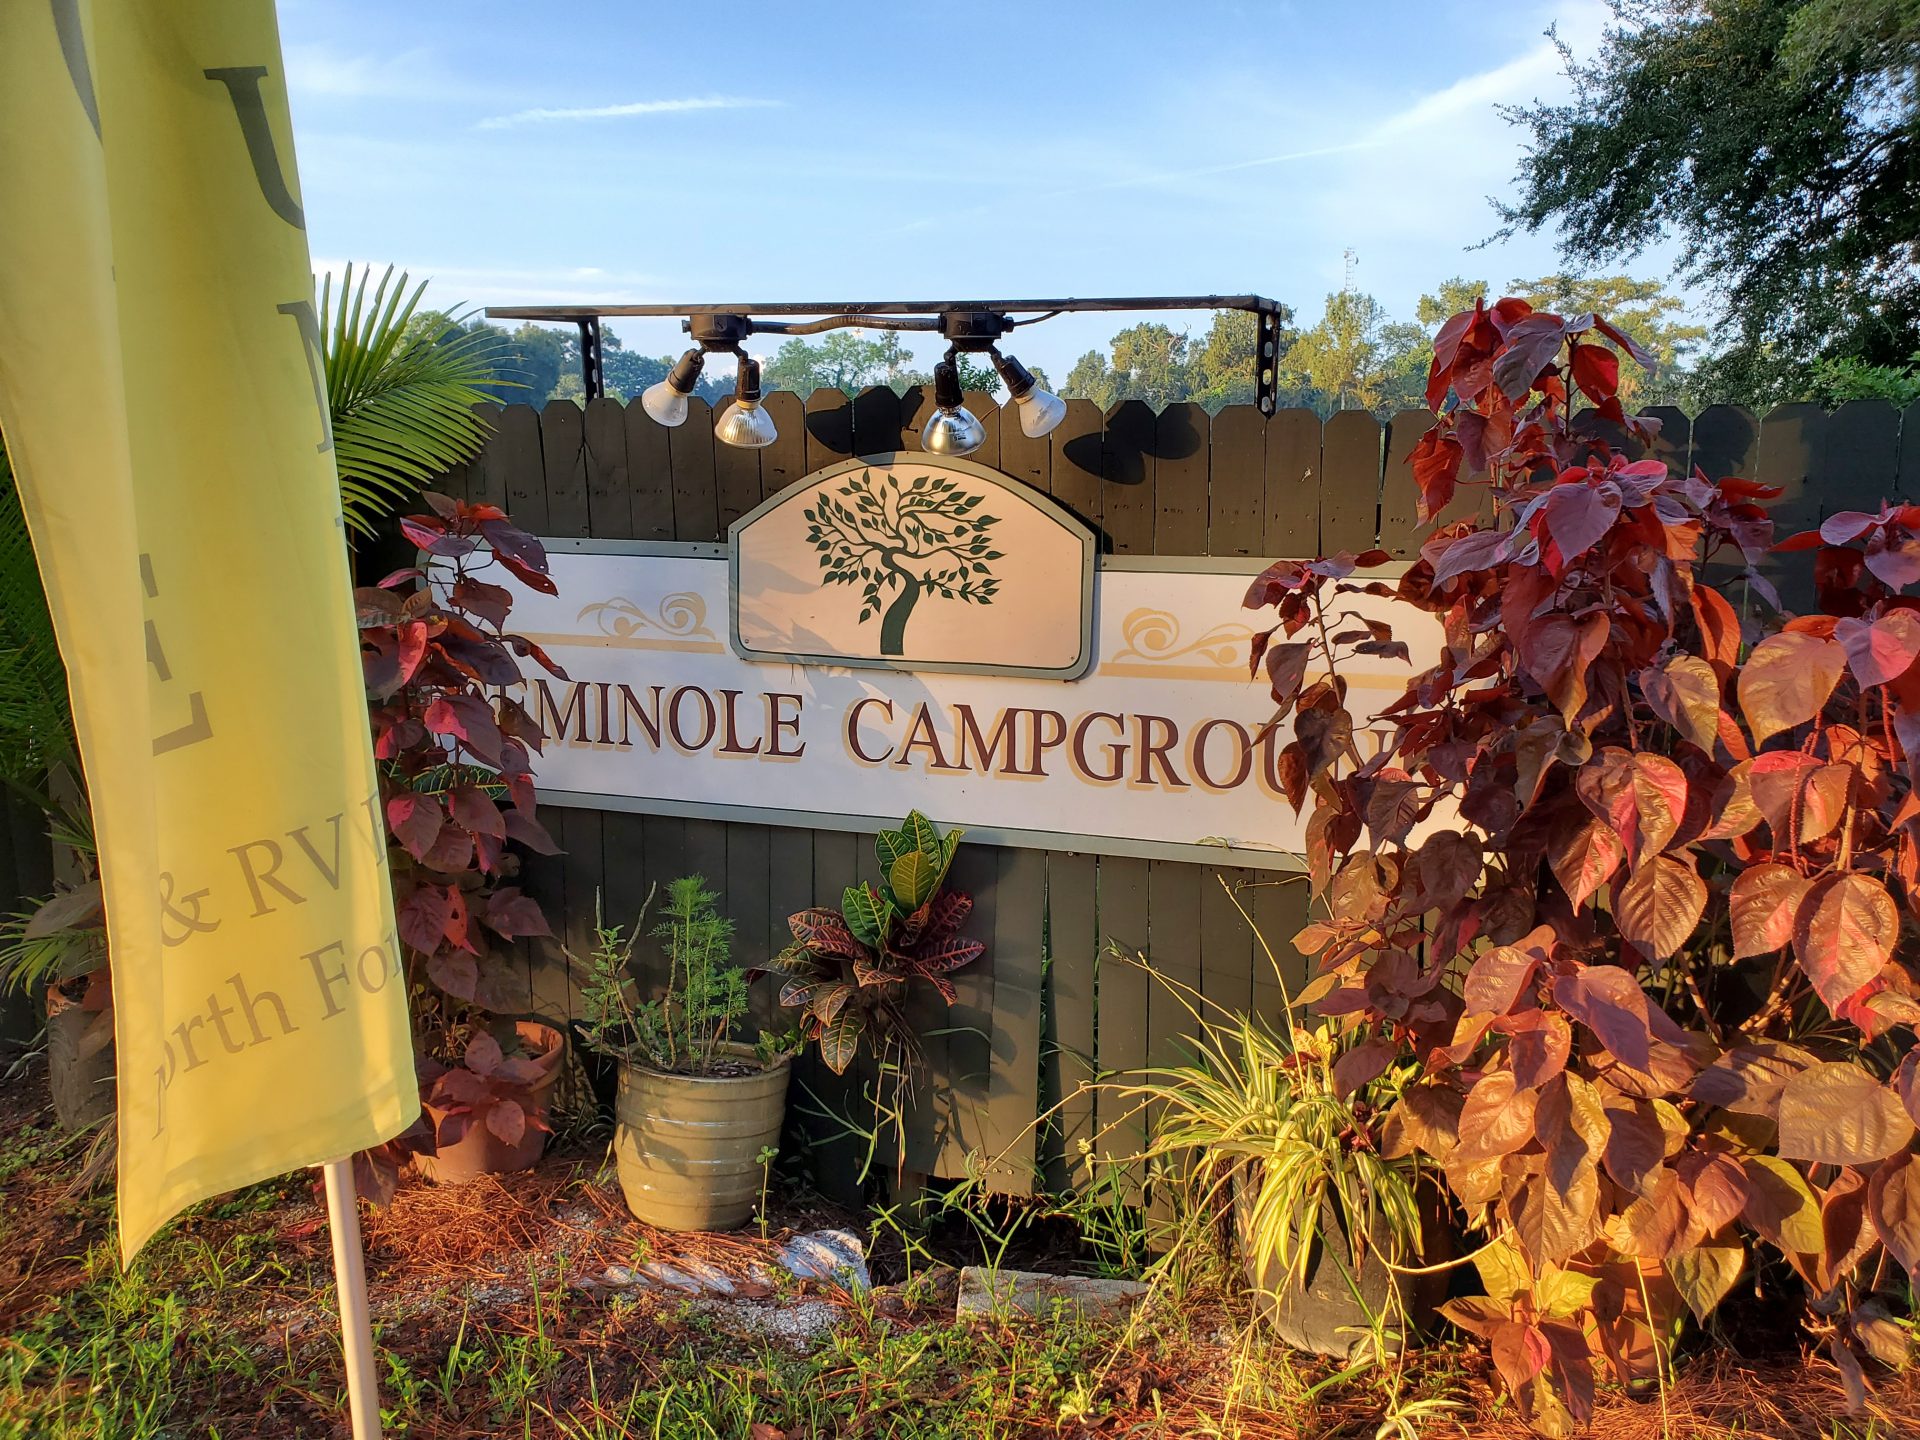 Seminole Campground in Ft. Myers FL - RV campground review